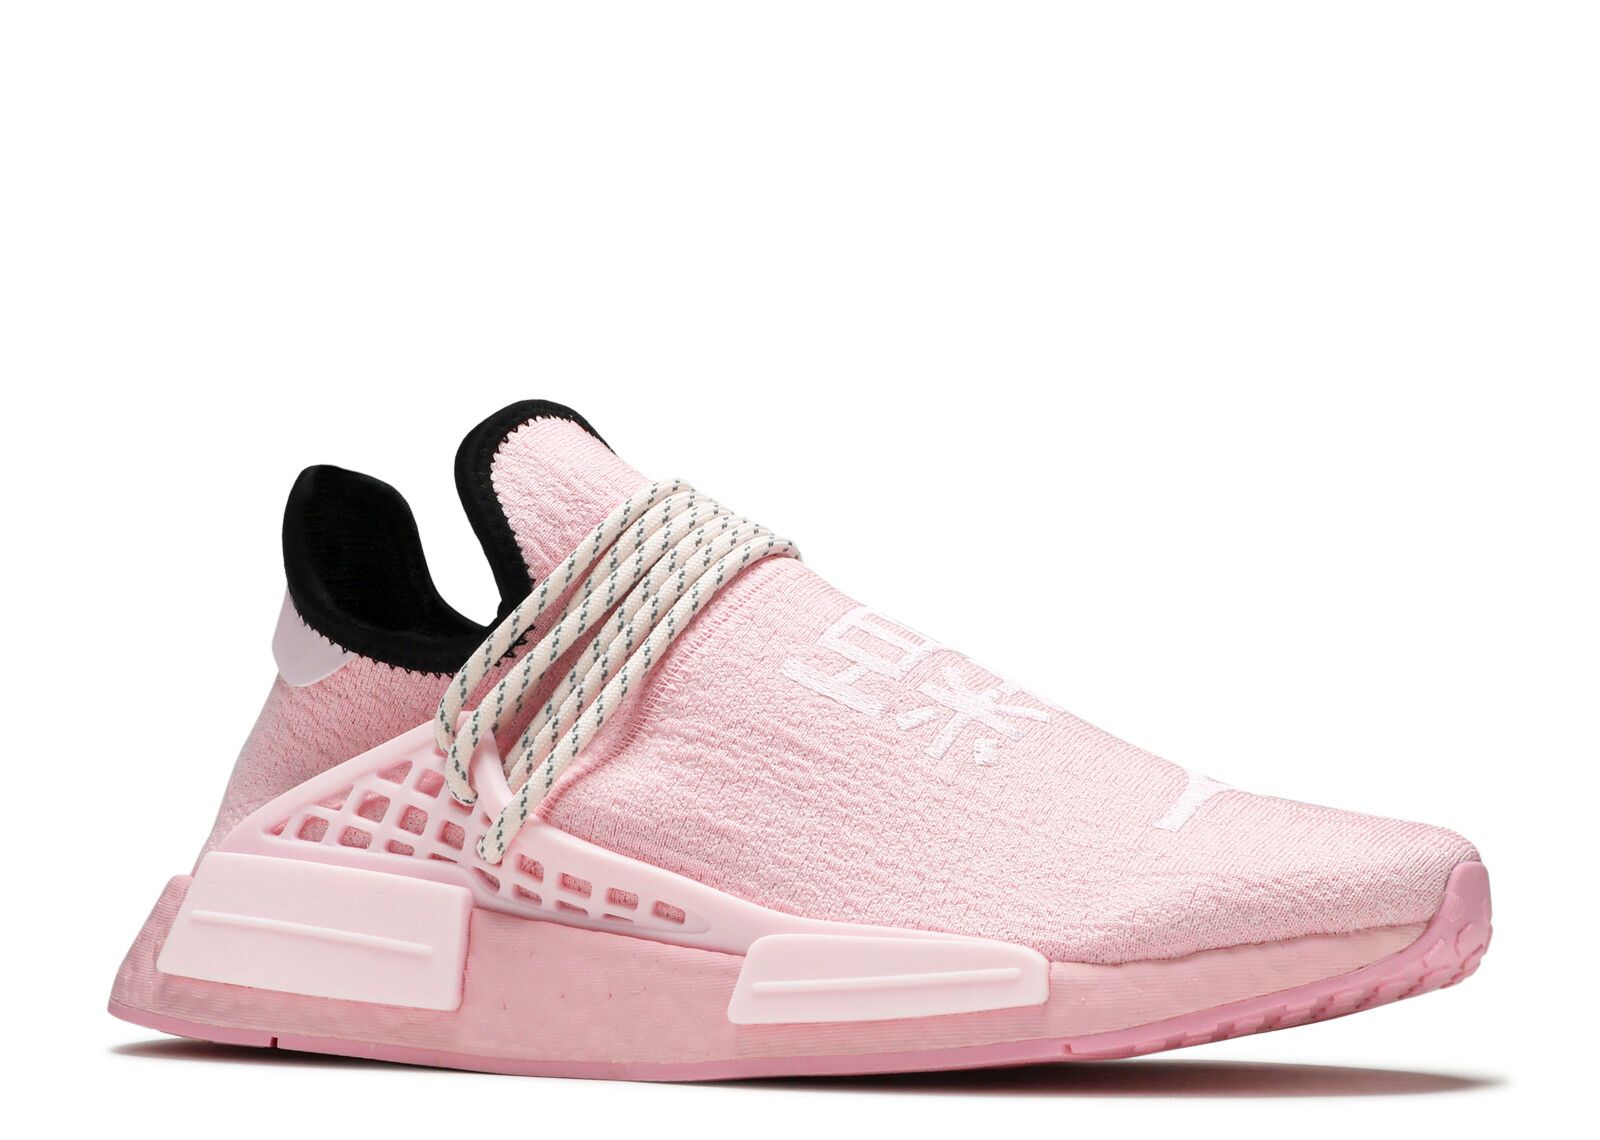 Pharrell X NMD Human Race 'Pink' - Adidas - GY0088 - true pink/clear ...